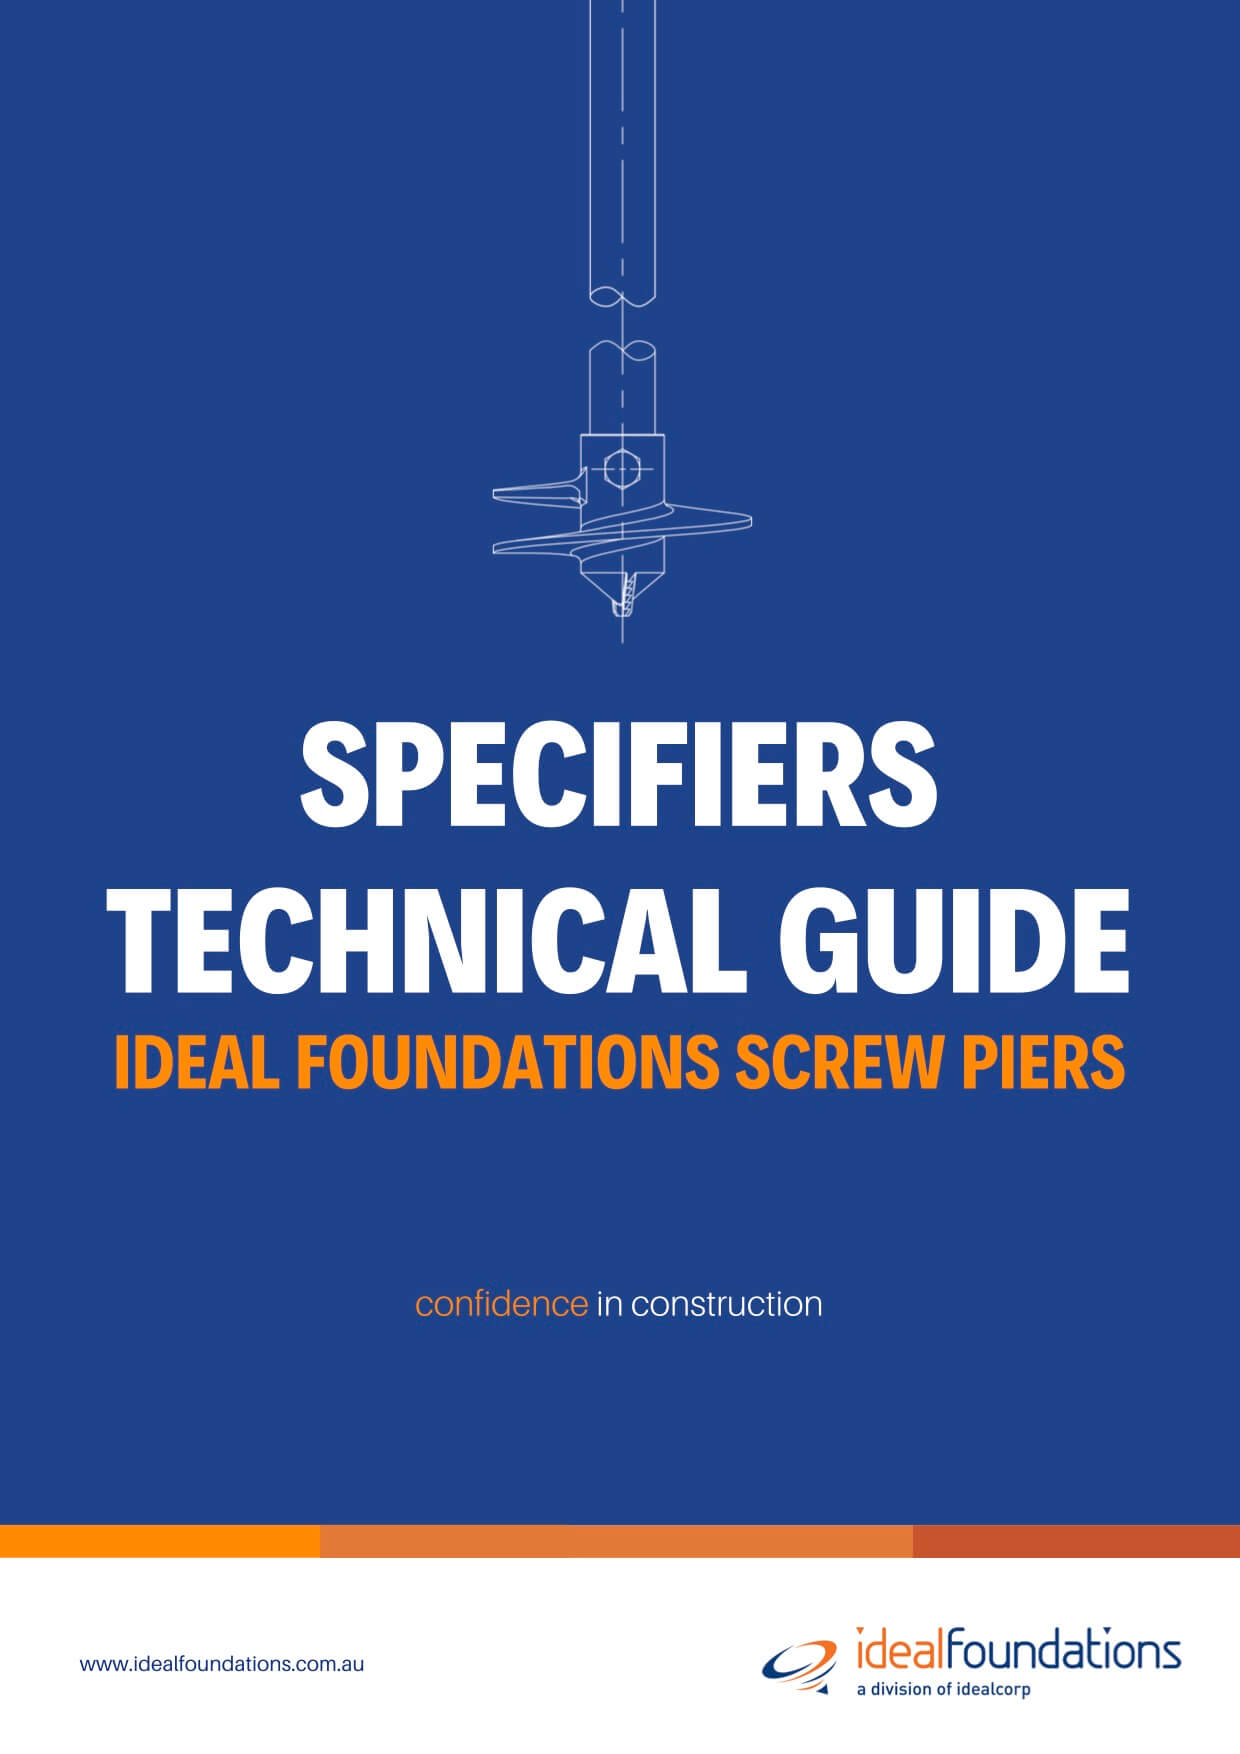 Ideal Foundations Screw pier technical guide for specifiers